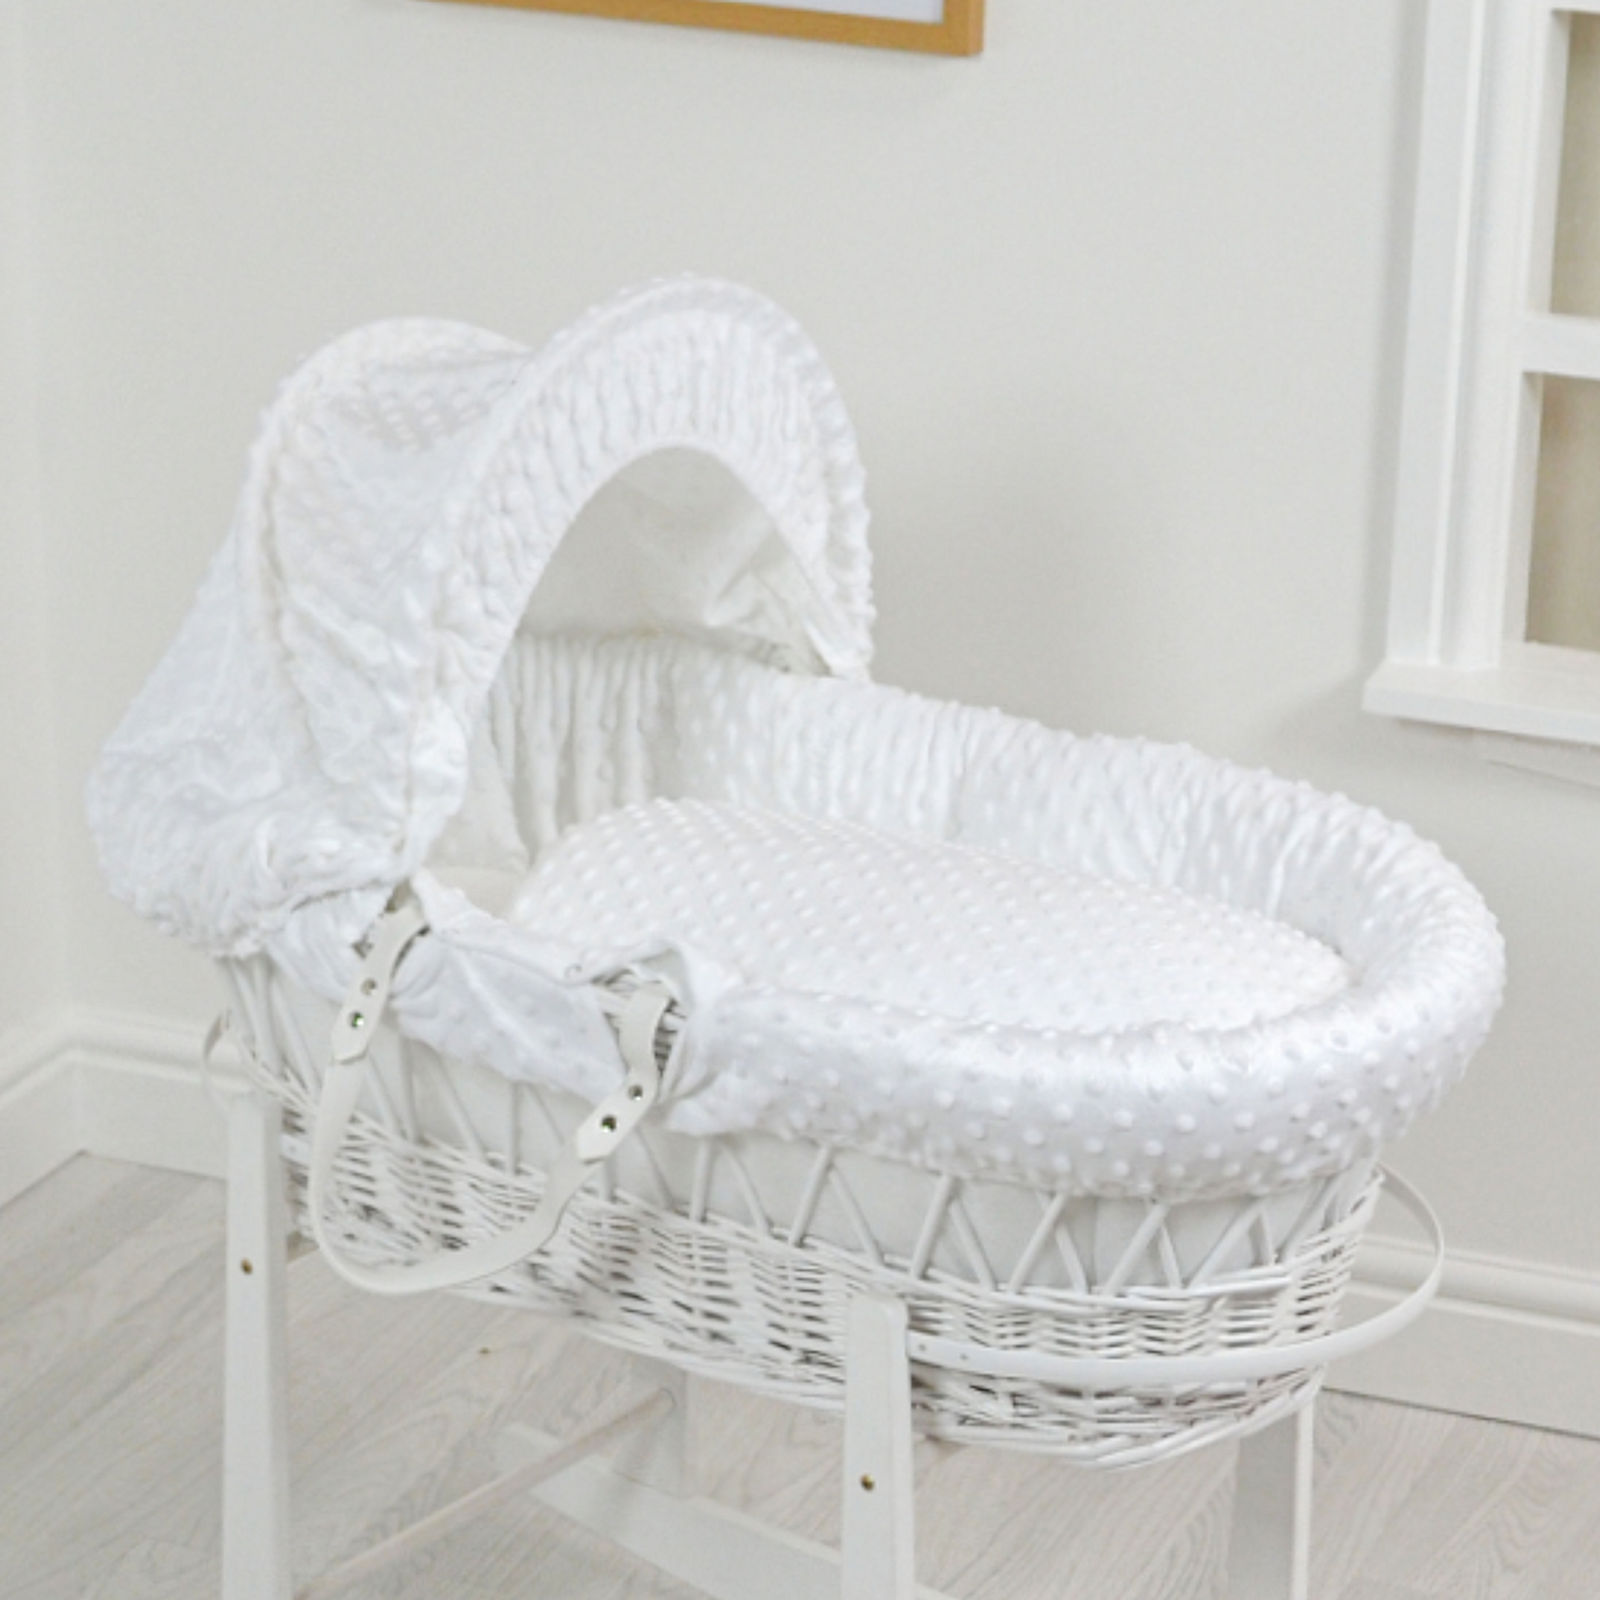 4Baby Luxury Padded White Wicker Baby Moses Basket - White Dimple